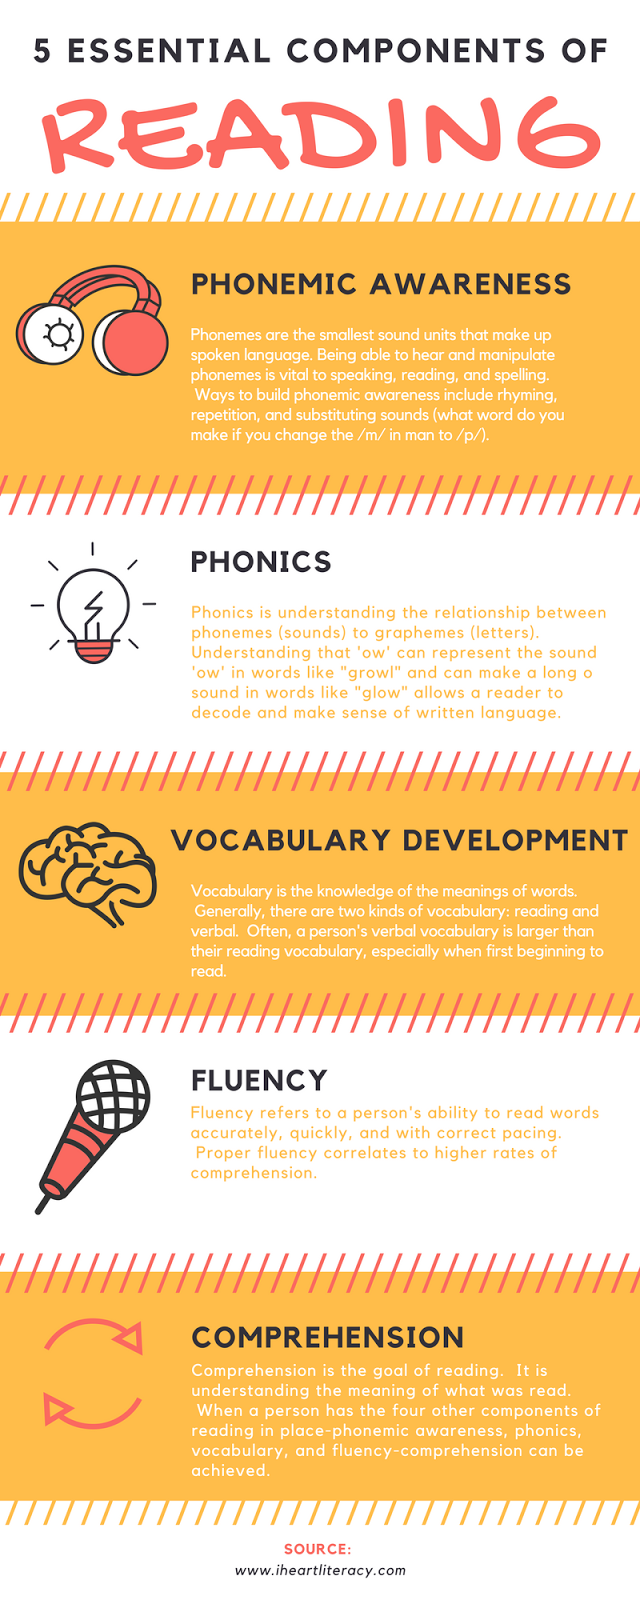 5 Essential Components of Reading Instruction: Phonemic Awareness, Phonics, Vocabulary, Fluency, and Comprehension